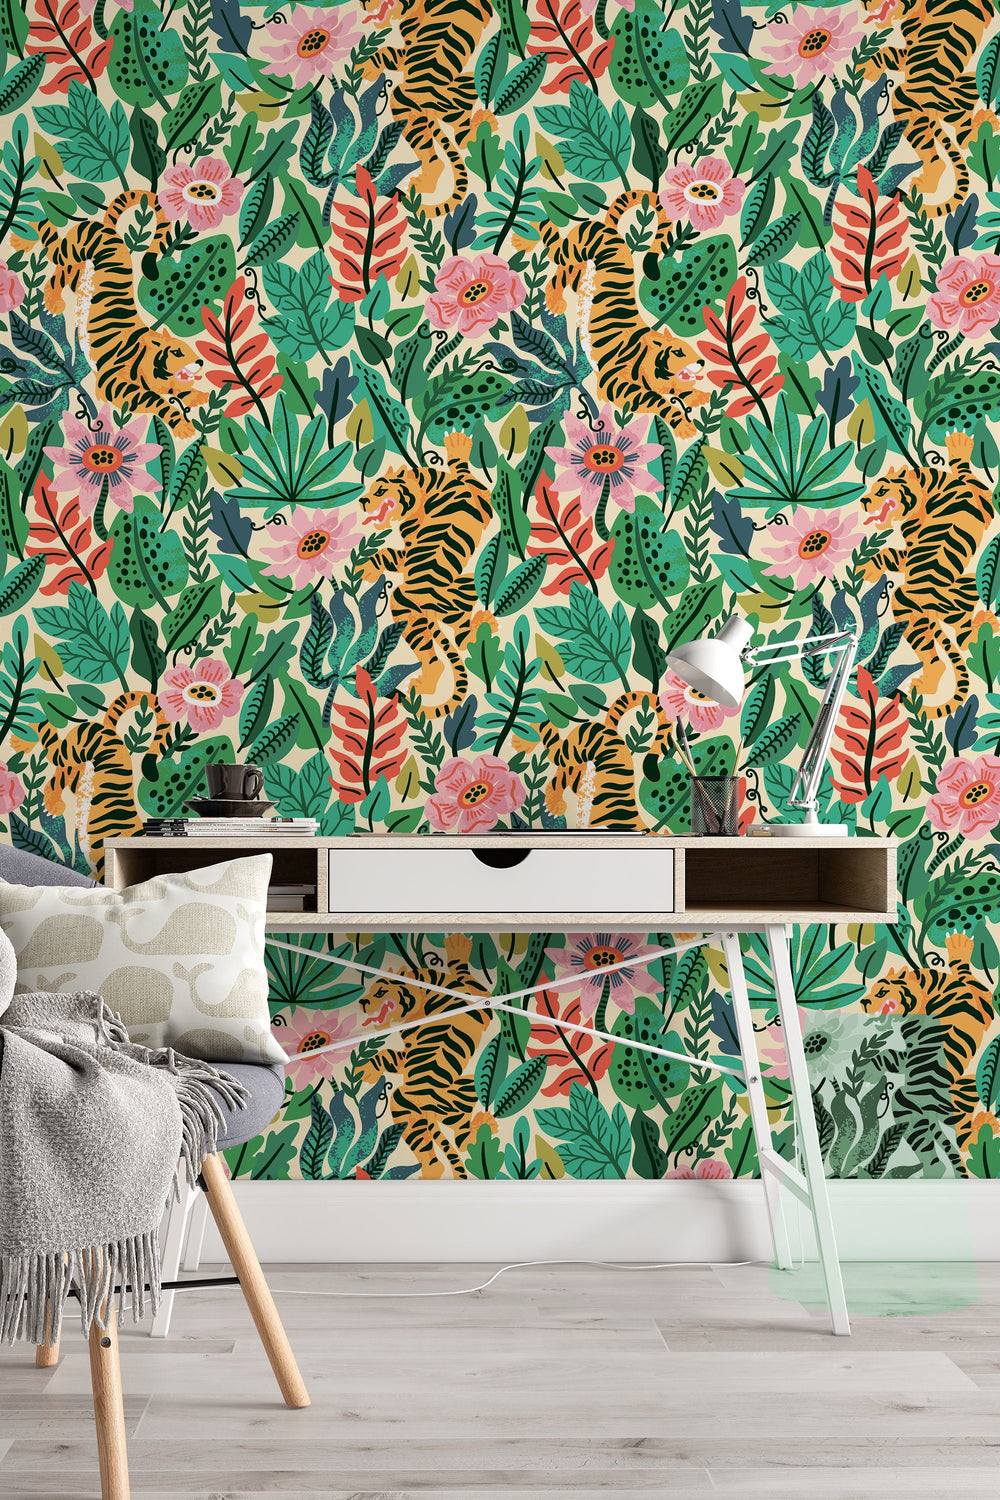 Tiger in the Woods Wallcovering - Fabric Peel & Stick Wallpaper - Removable Self Adhesive Wallpaper Roll pattern wallpaper design#3094